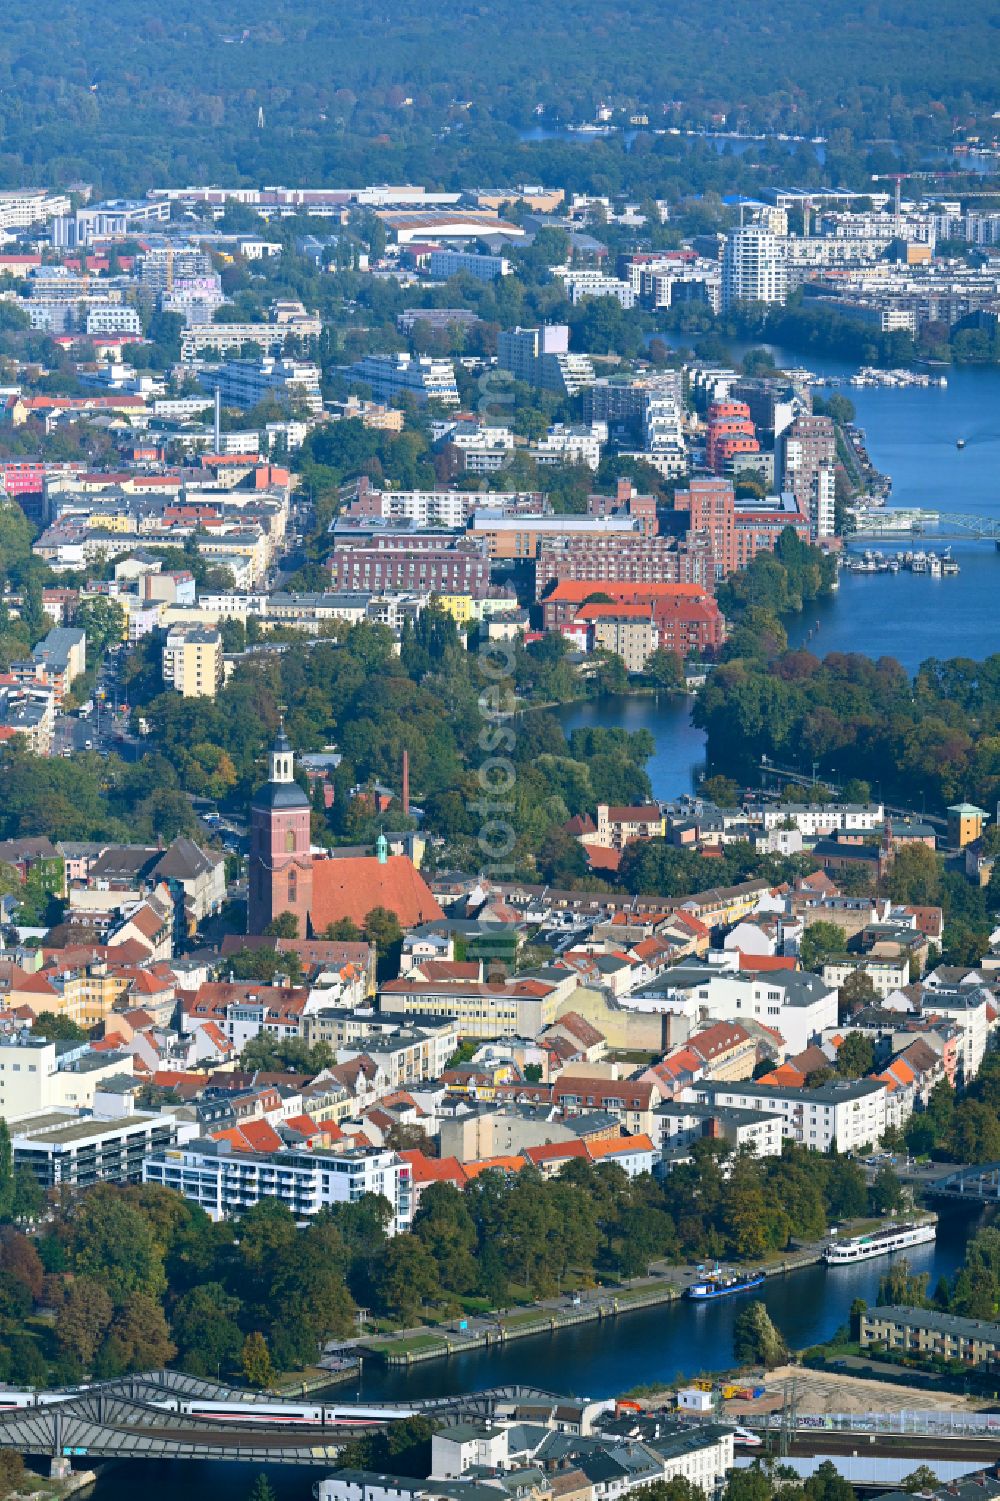 Berlin from above - Old Town area and city center Spandau in the district Spandau in Berlin, Germany